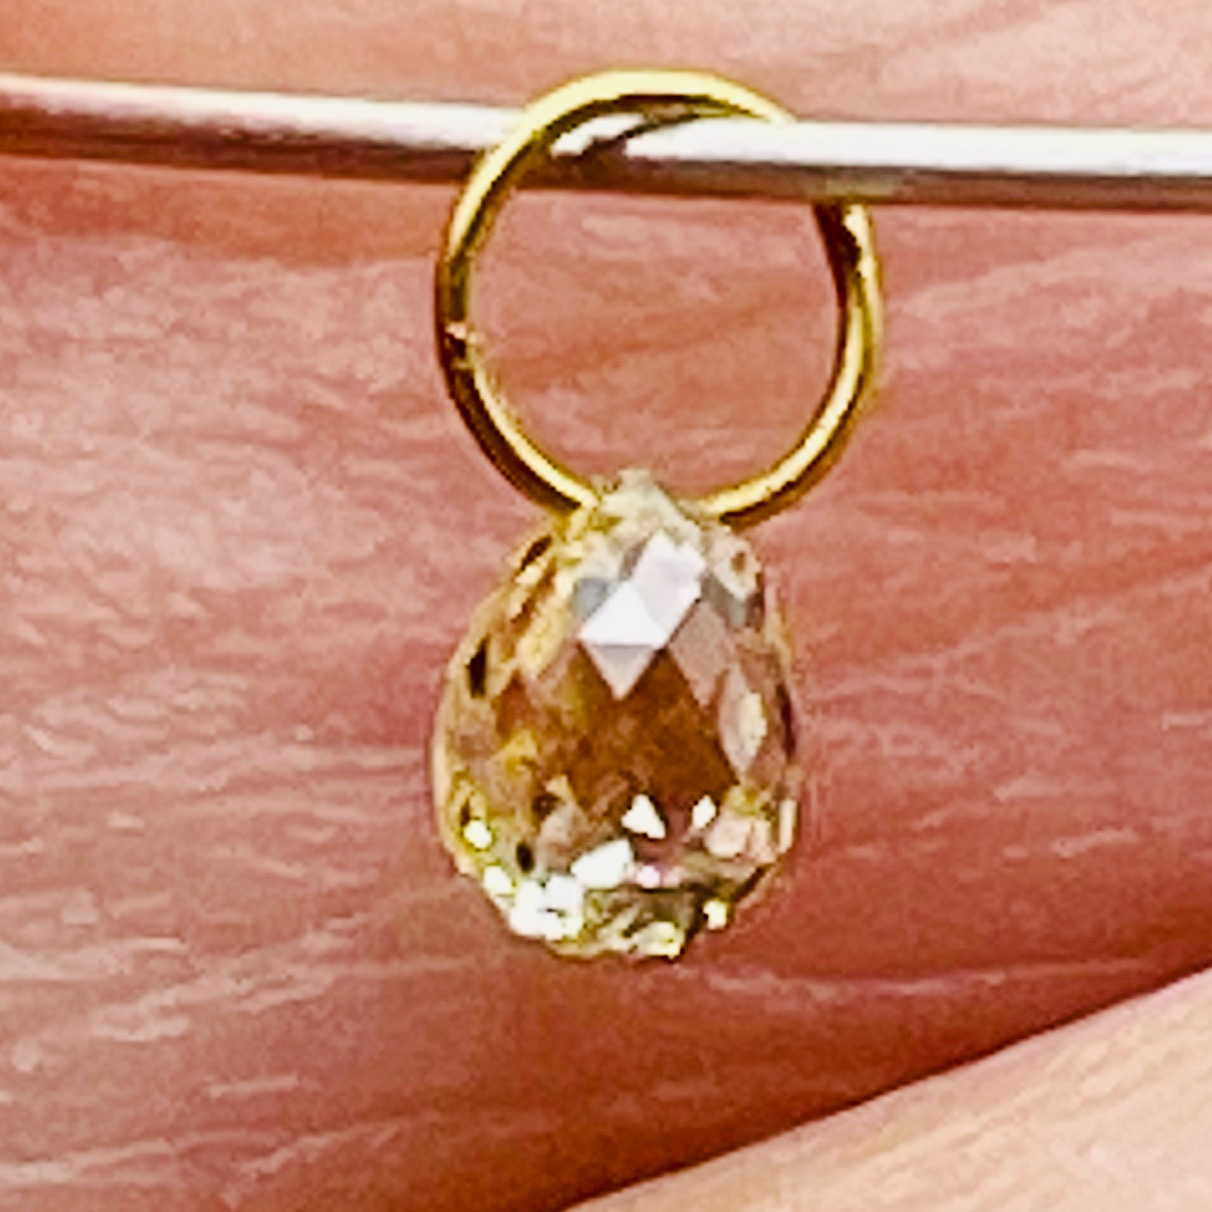 0.28cts Natural Canary Diamond 18K Gold Pendant | 3.25x2.5x2.25mm | - image 2 of 12